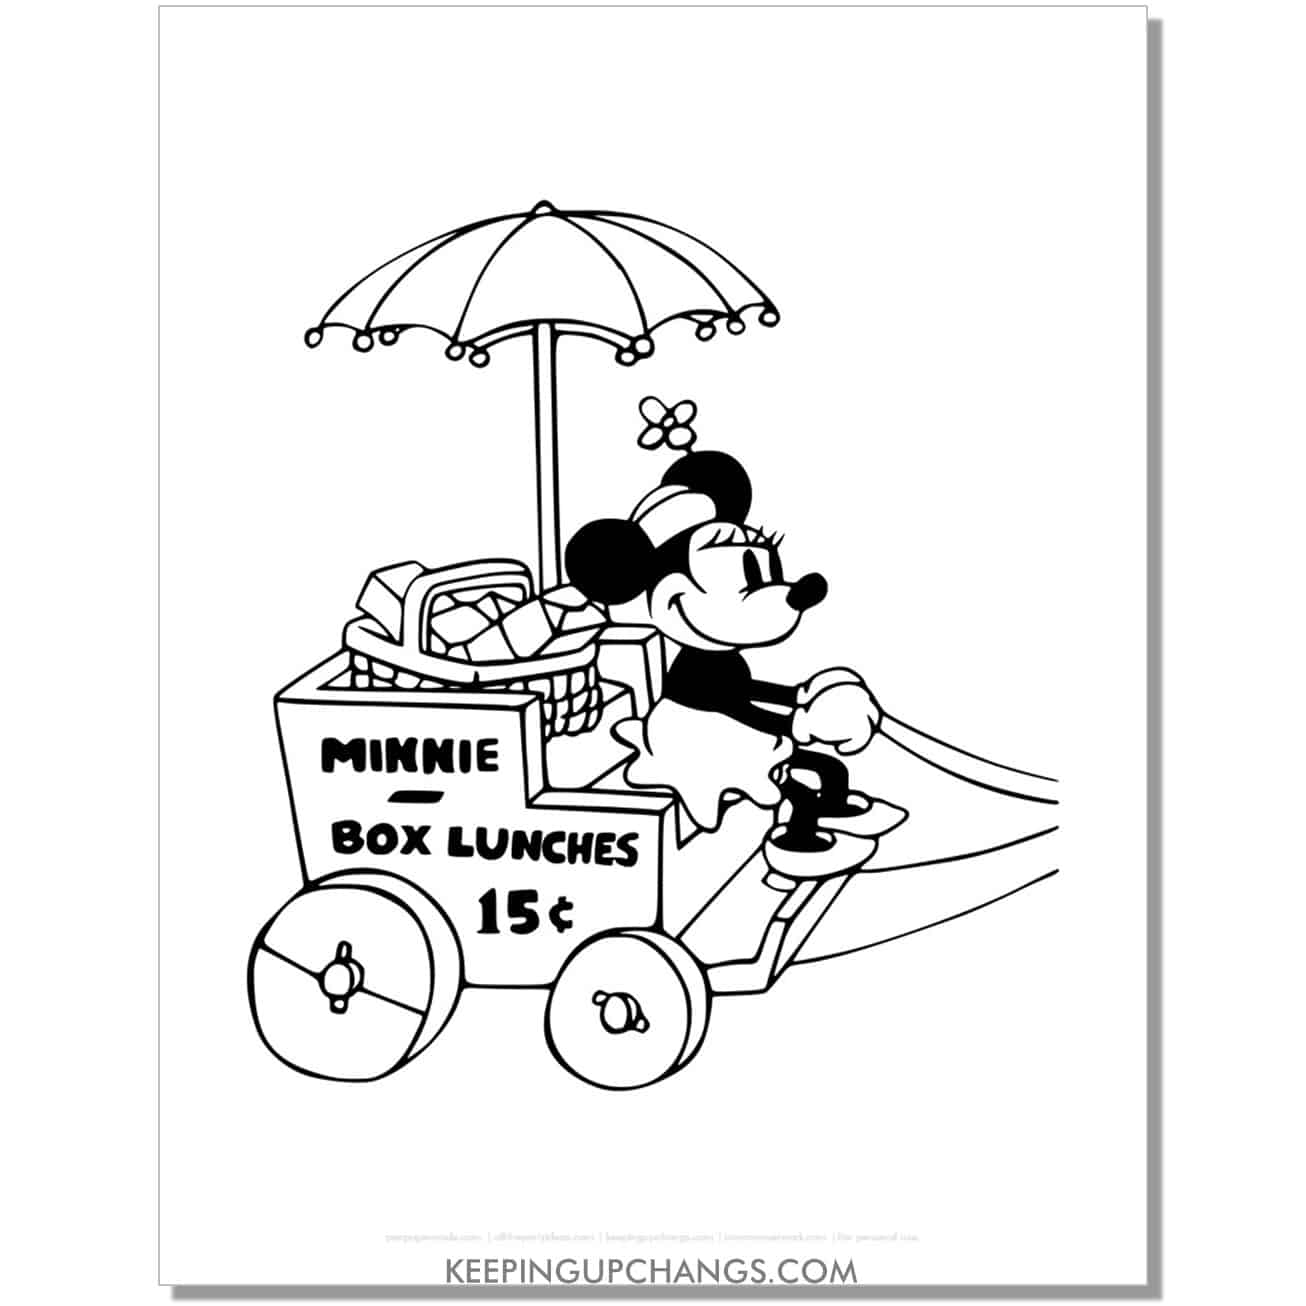 free old fashioned minnie mouse with box lunch cart coloring page, sheet.